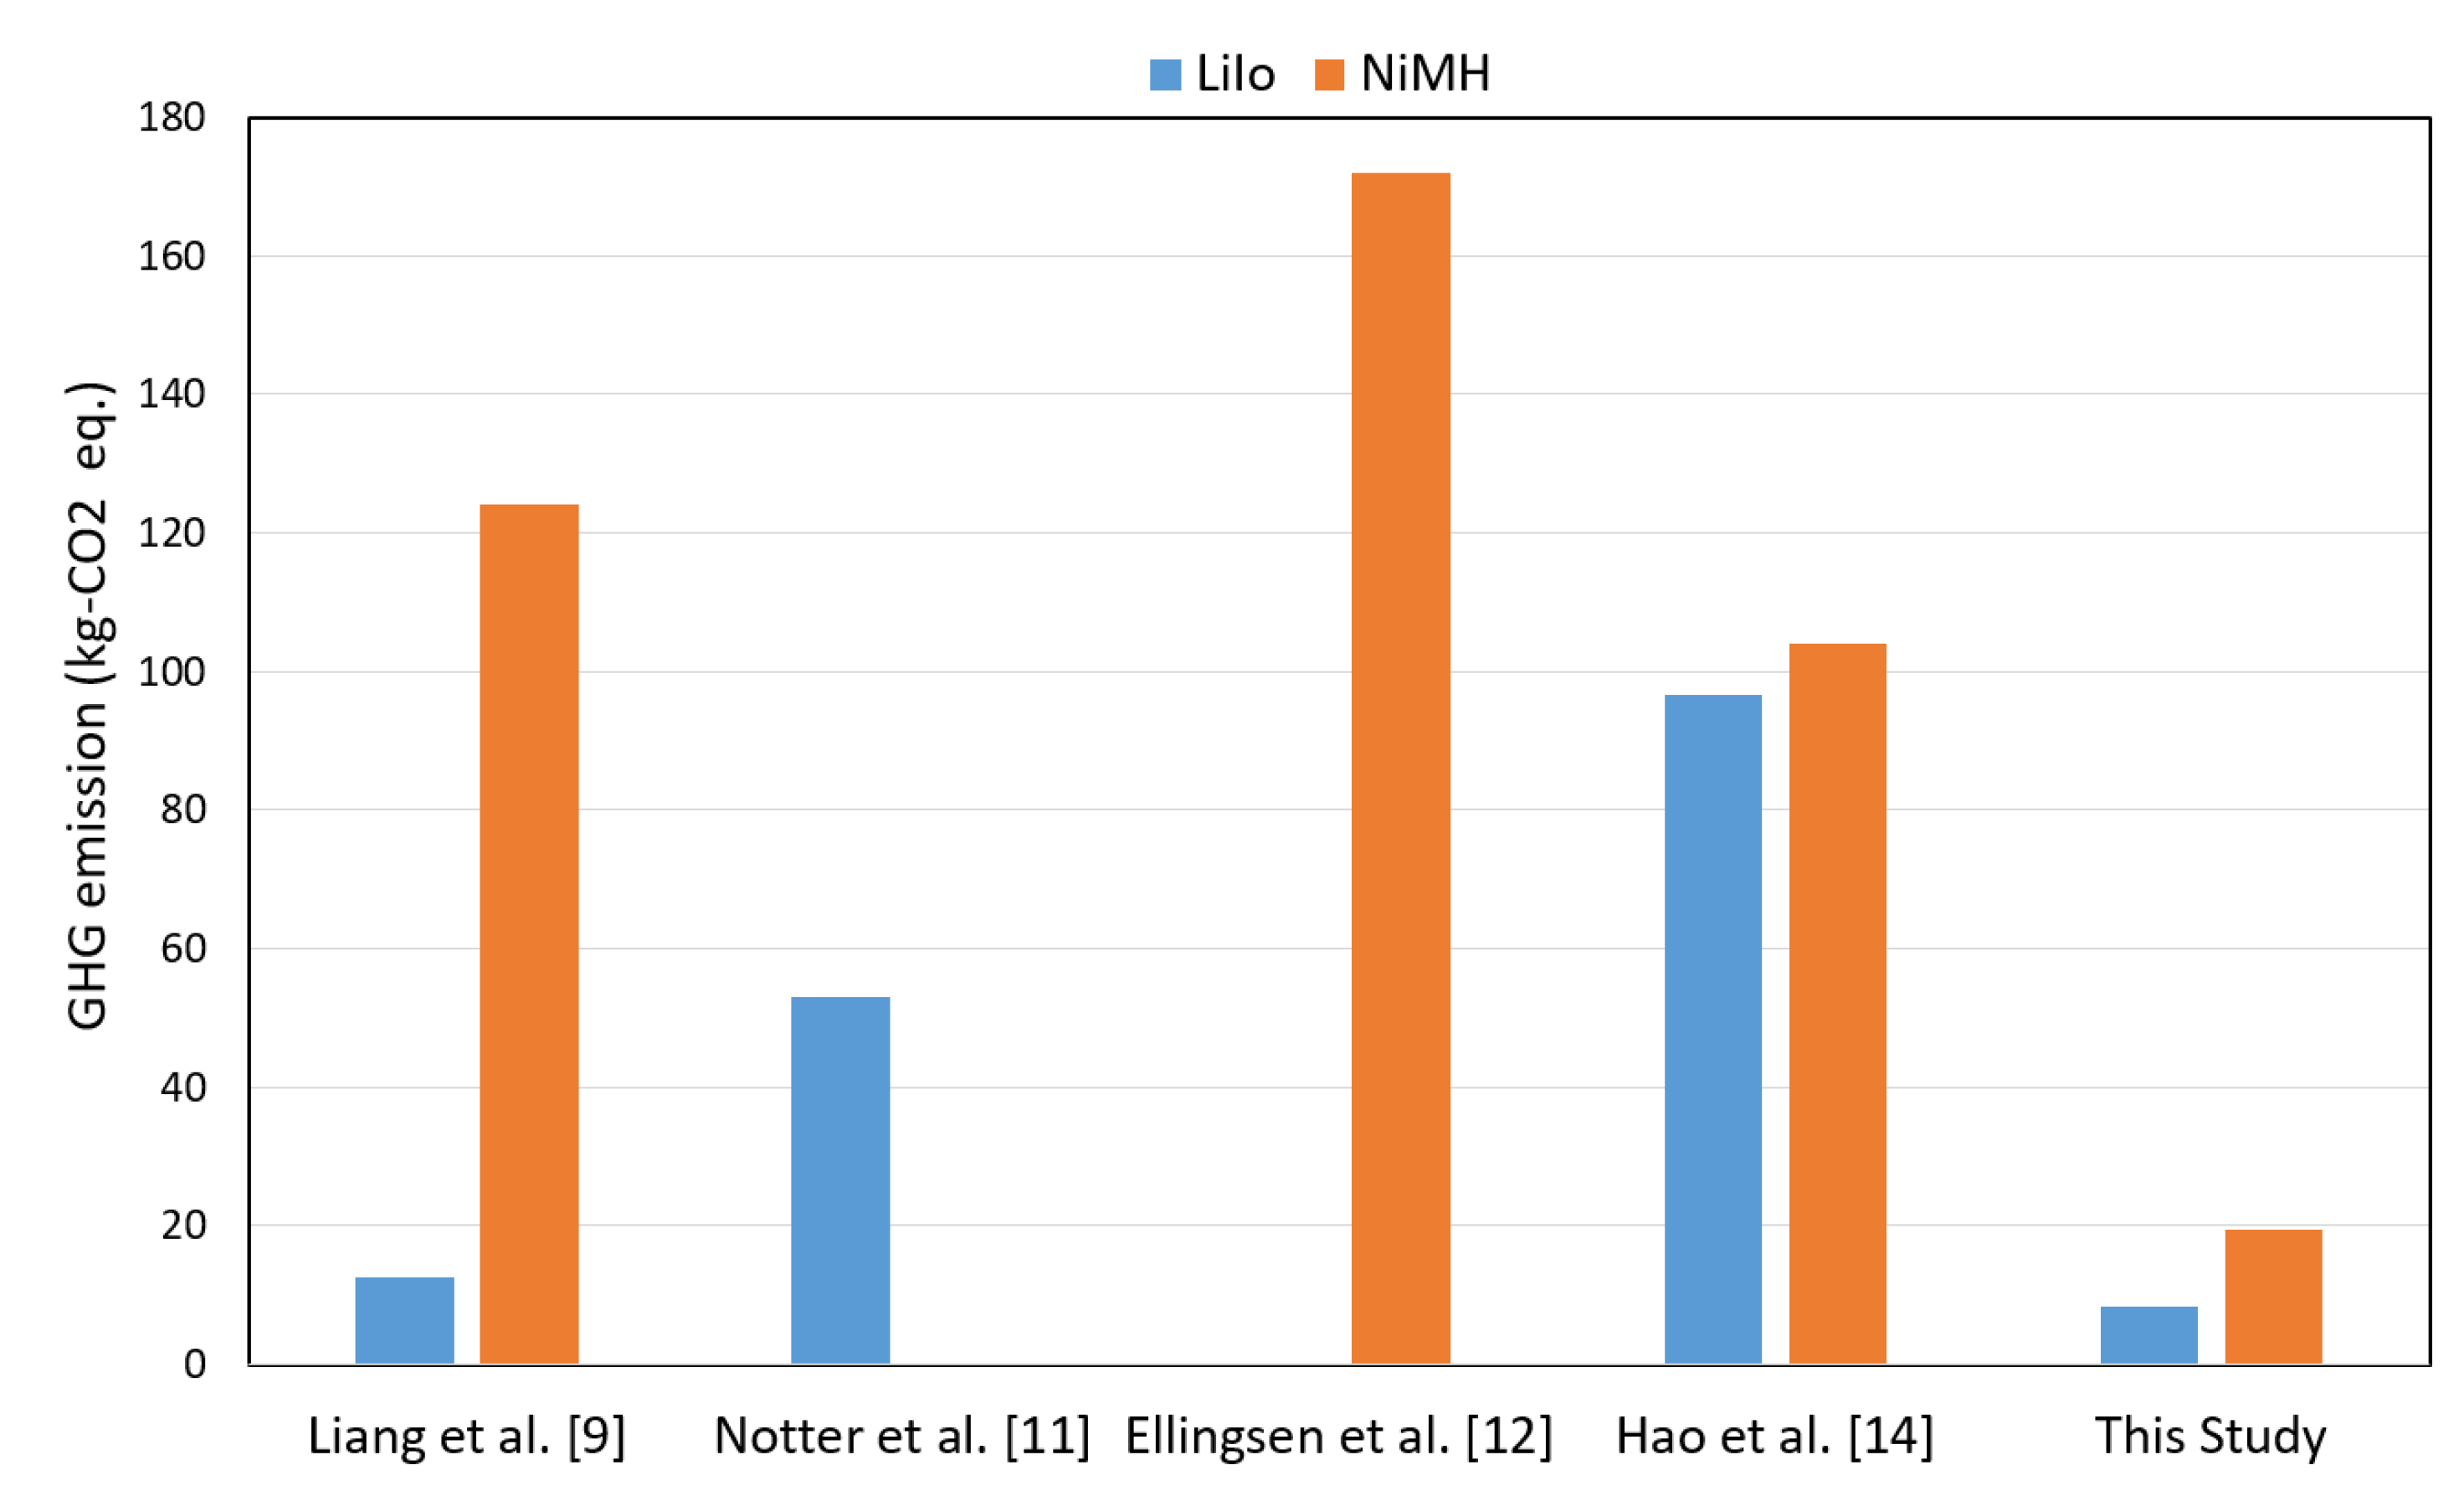 Batteries | Free Full-Text | Comparative Life Cycle Environmental Impact  Analysis of Lithium-Ion (LiIo) and Nickel-Metal Hydride (NiMH) Batteries